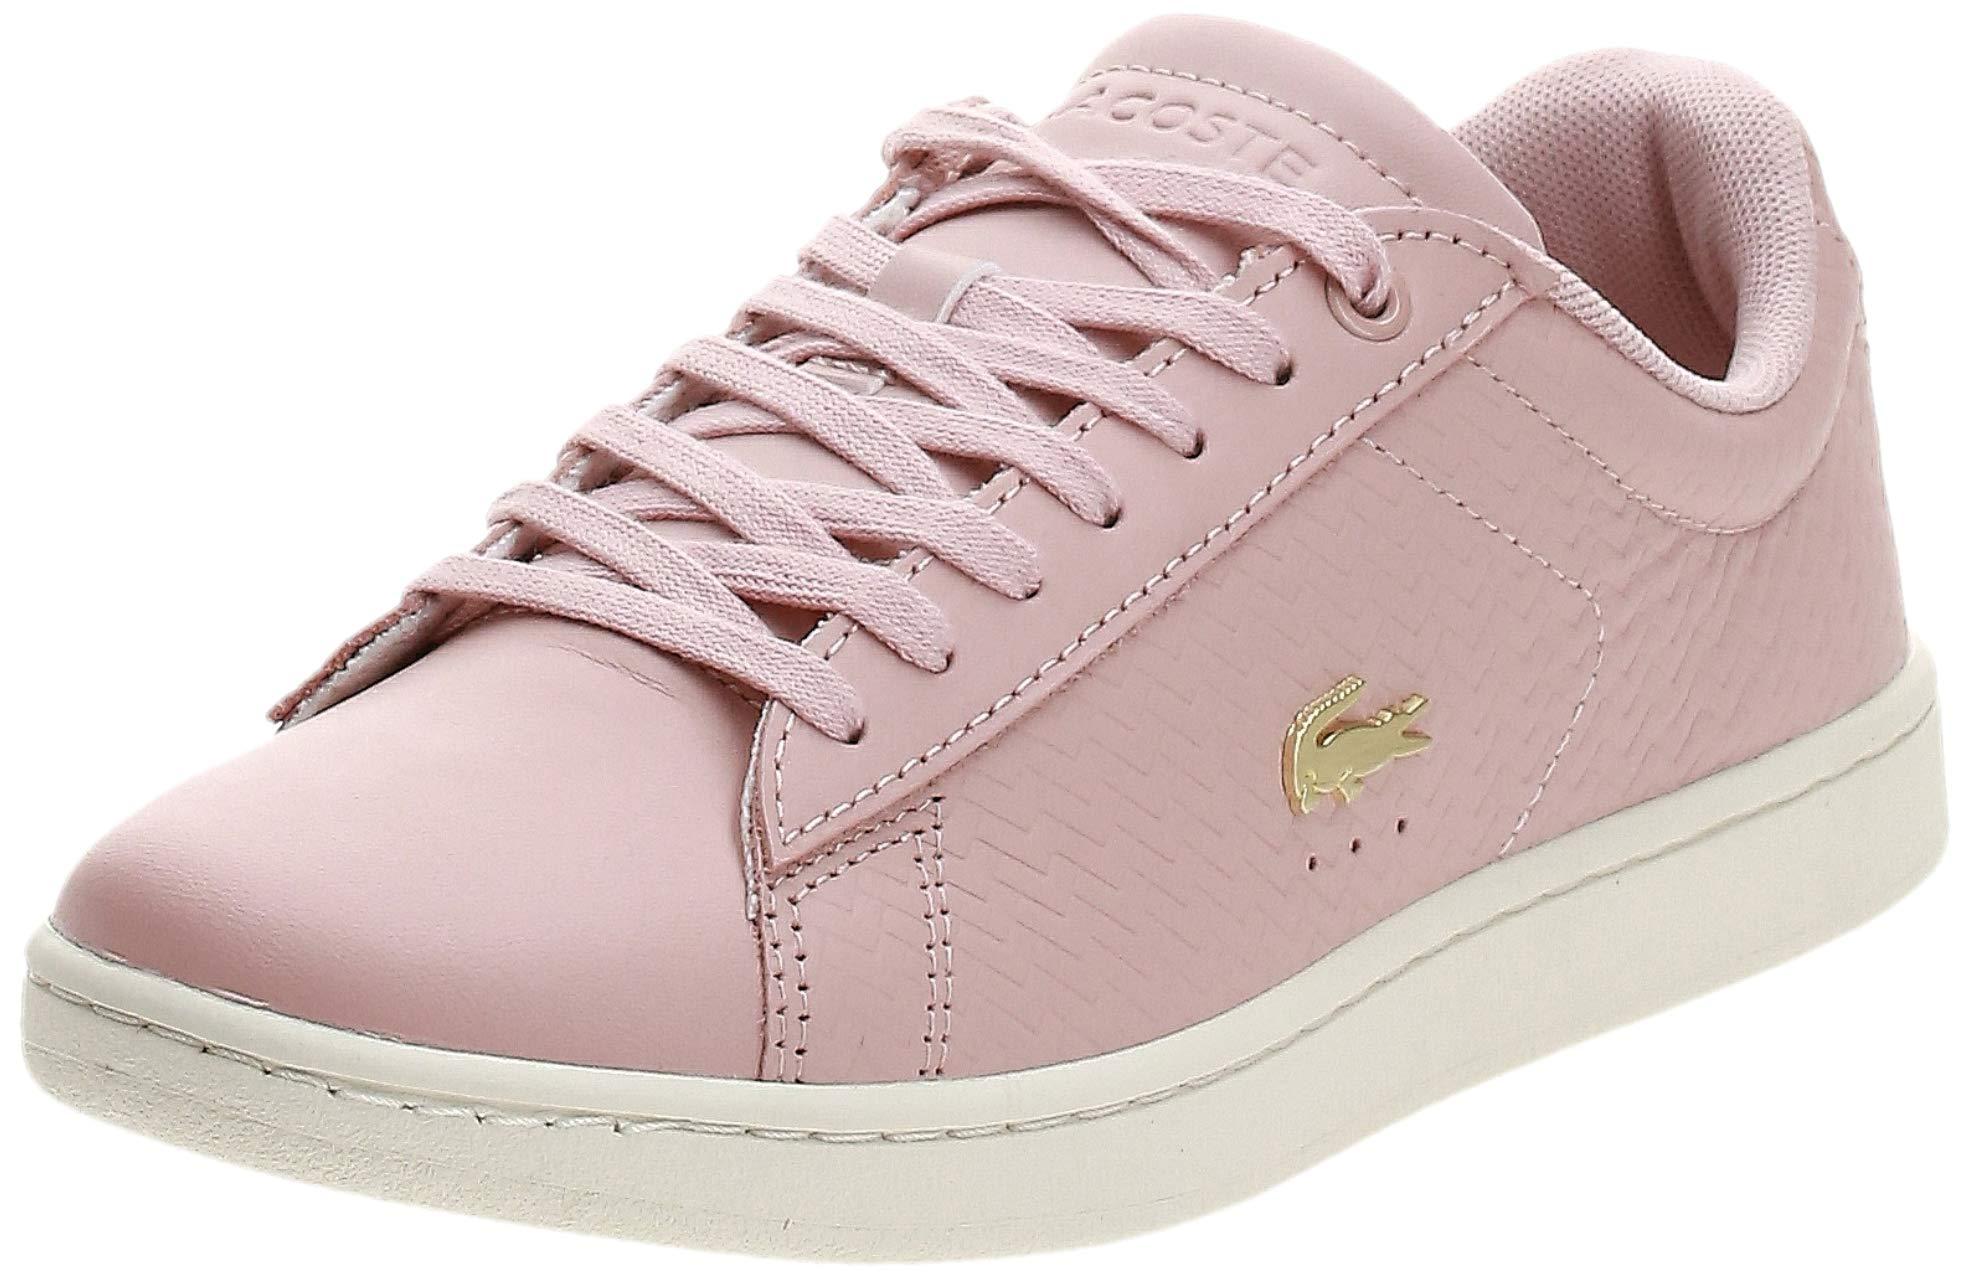 Lacoste Leather Carnaby Evo 119 3 Sfa Trainers in Pink | Lyst